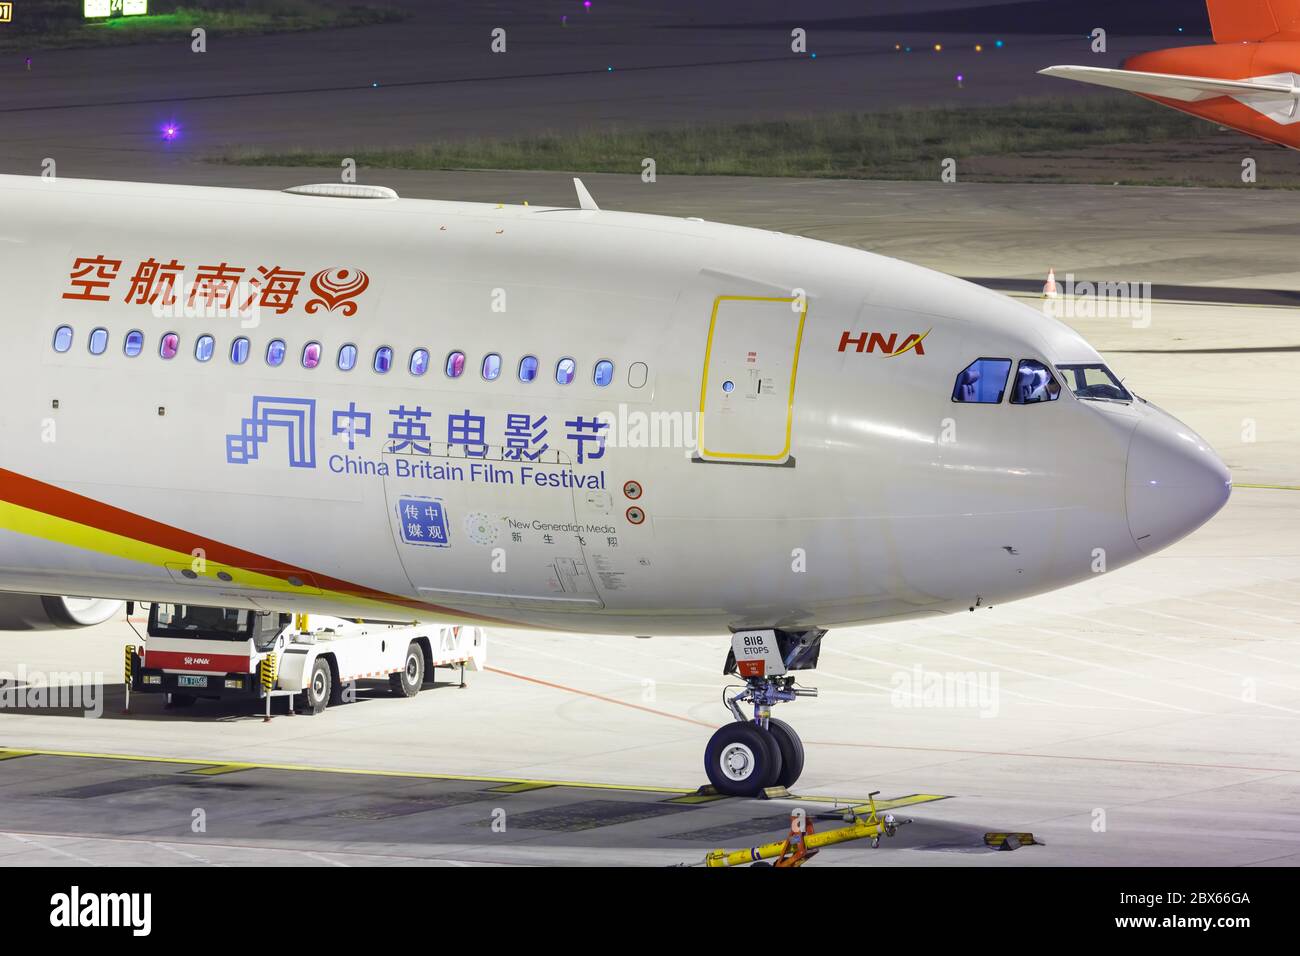 Beijing, China - October 1, 2019: Hainan Airlines Airbus A330-300 airplane at Beijing Capital airport PEK in China. Airbus is a European aircraft manu Stock Photo